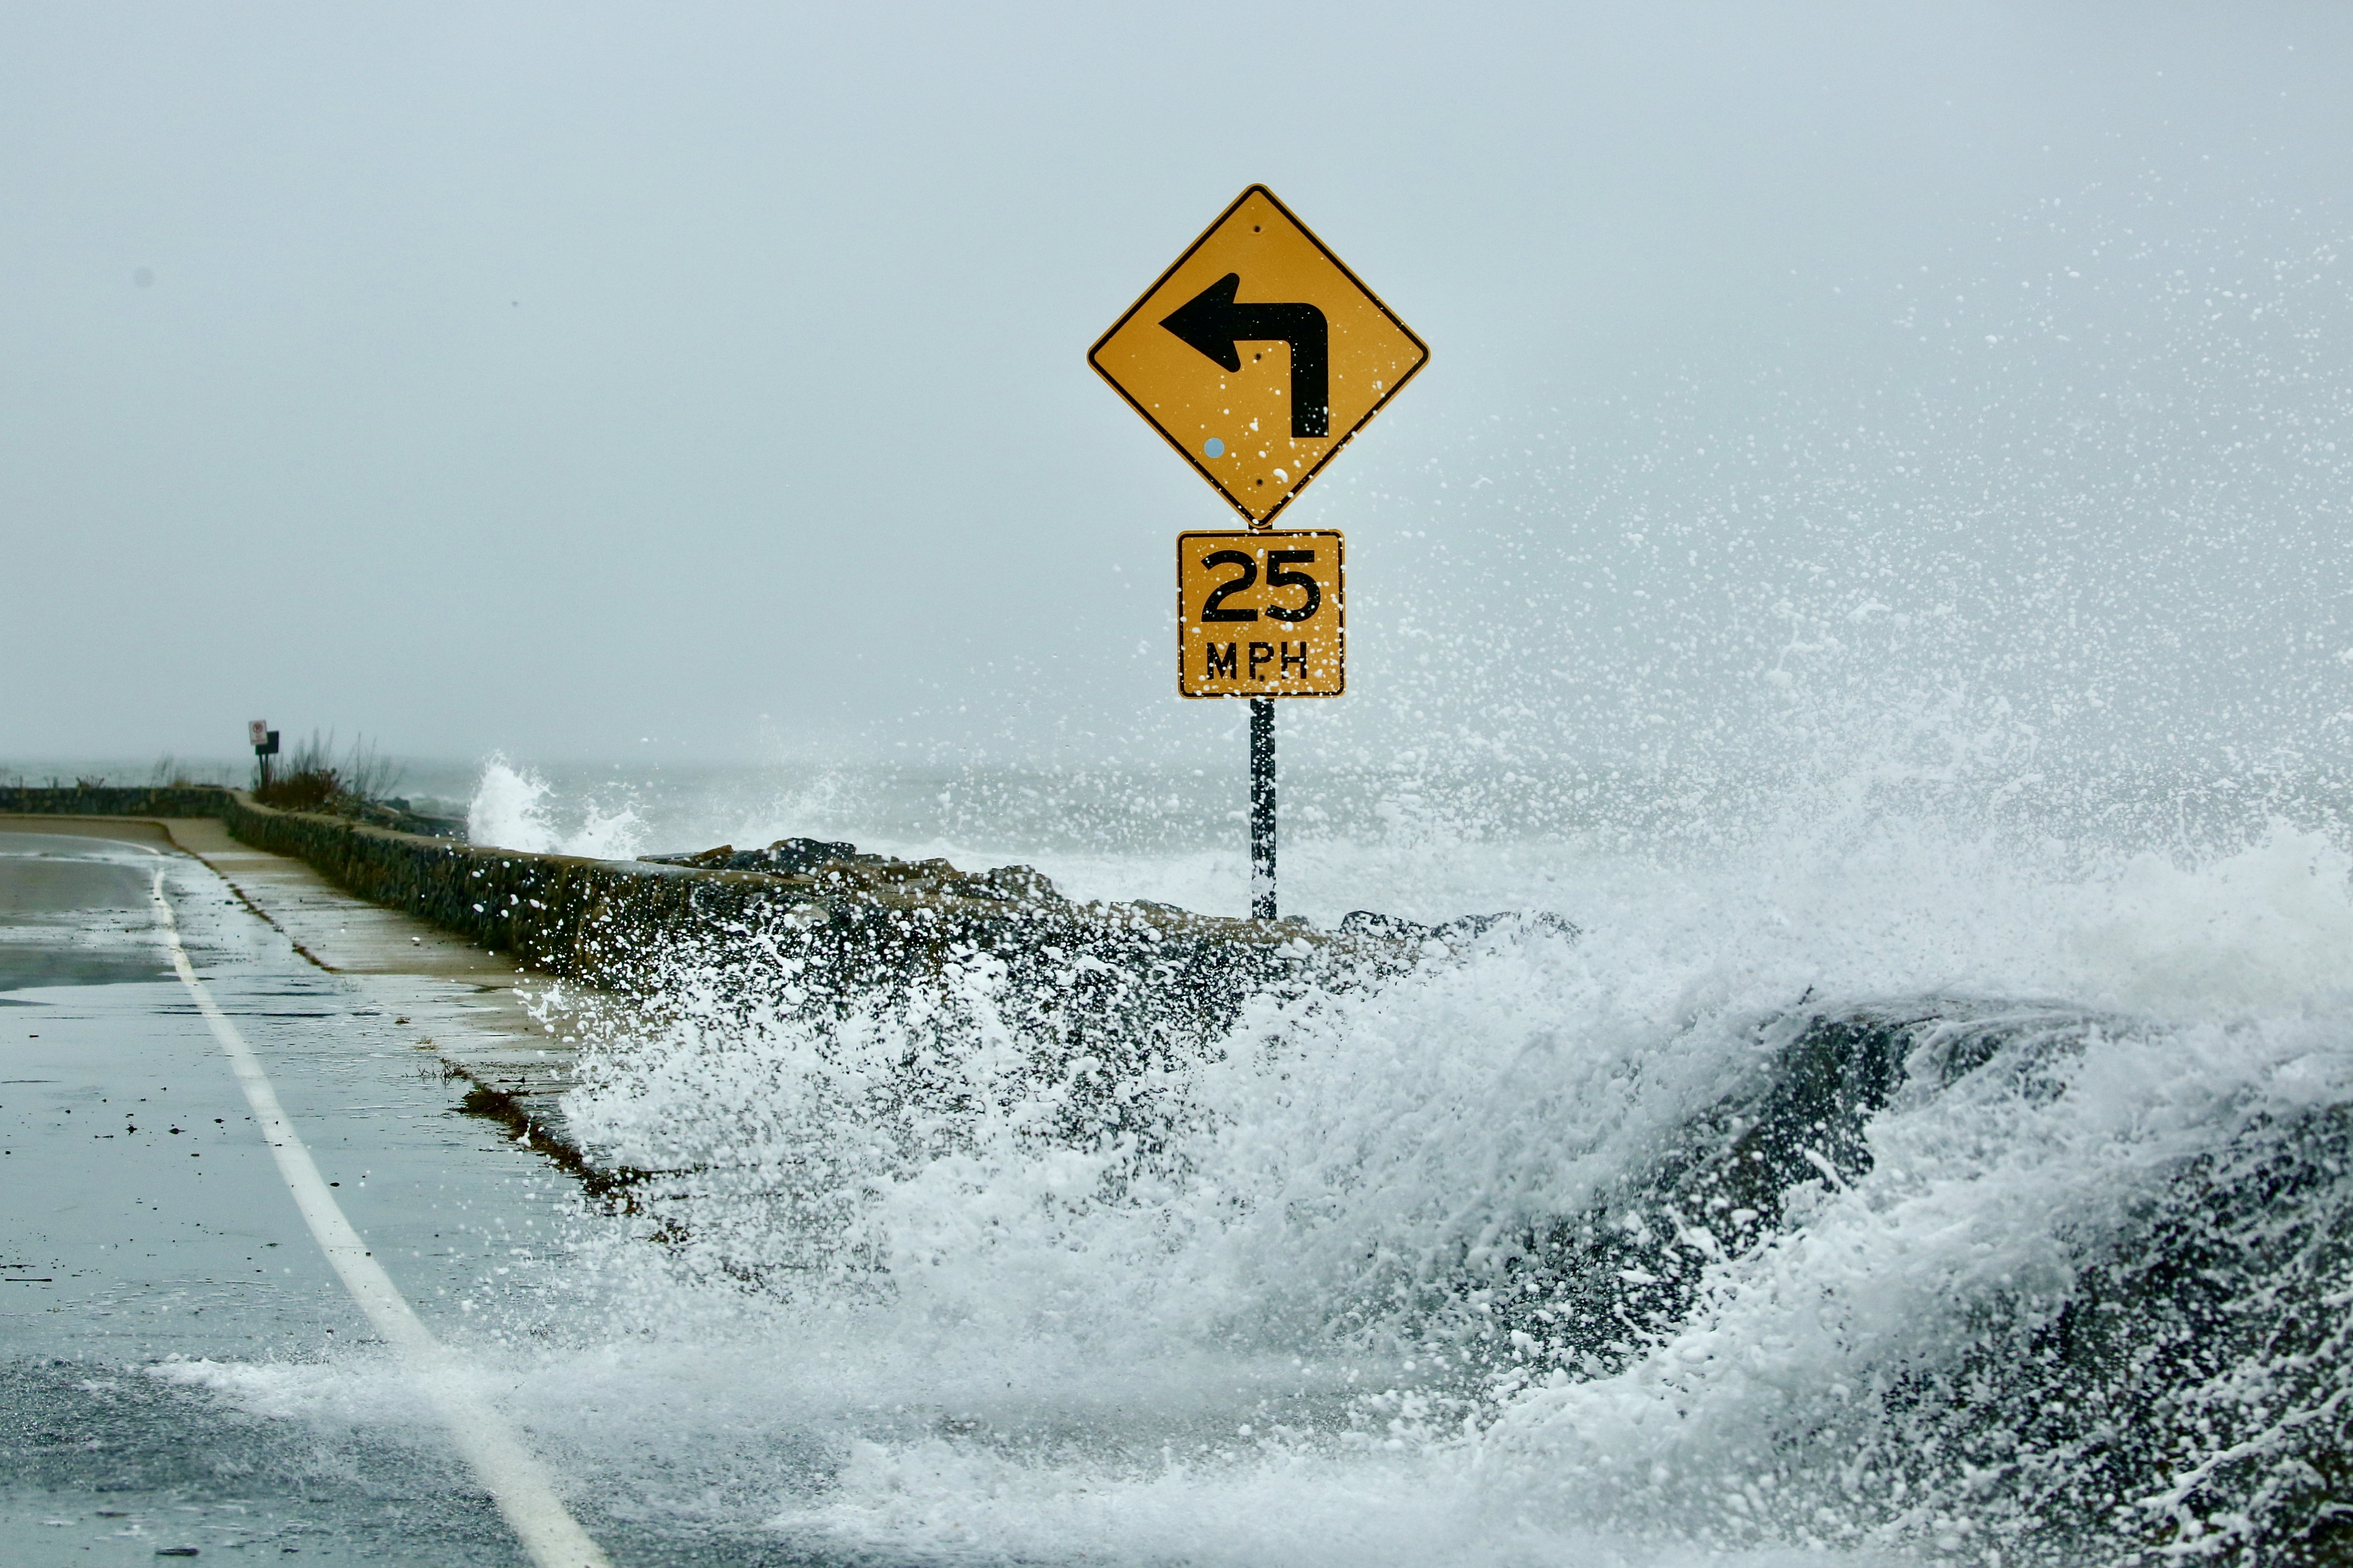 a wave breaks over a seawall and into a roadway.